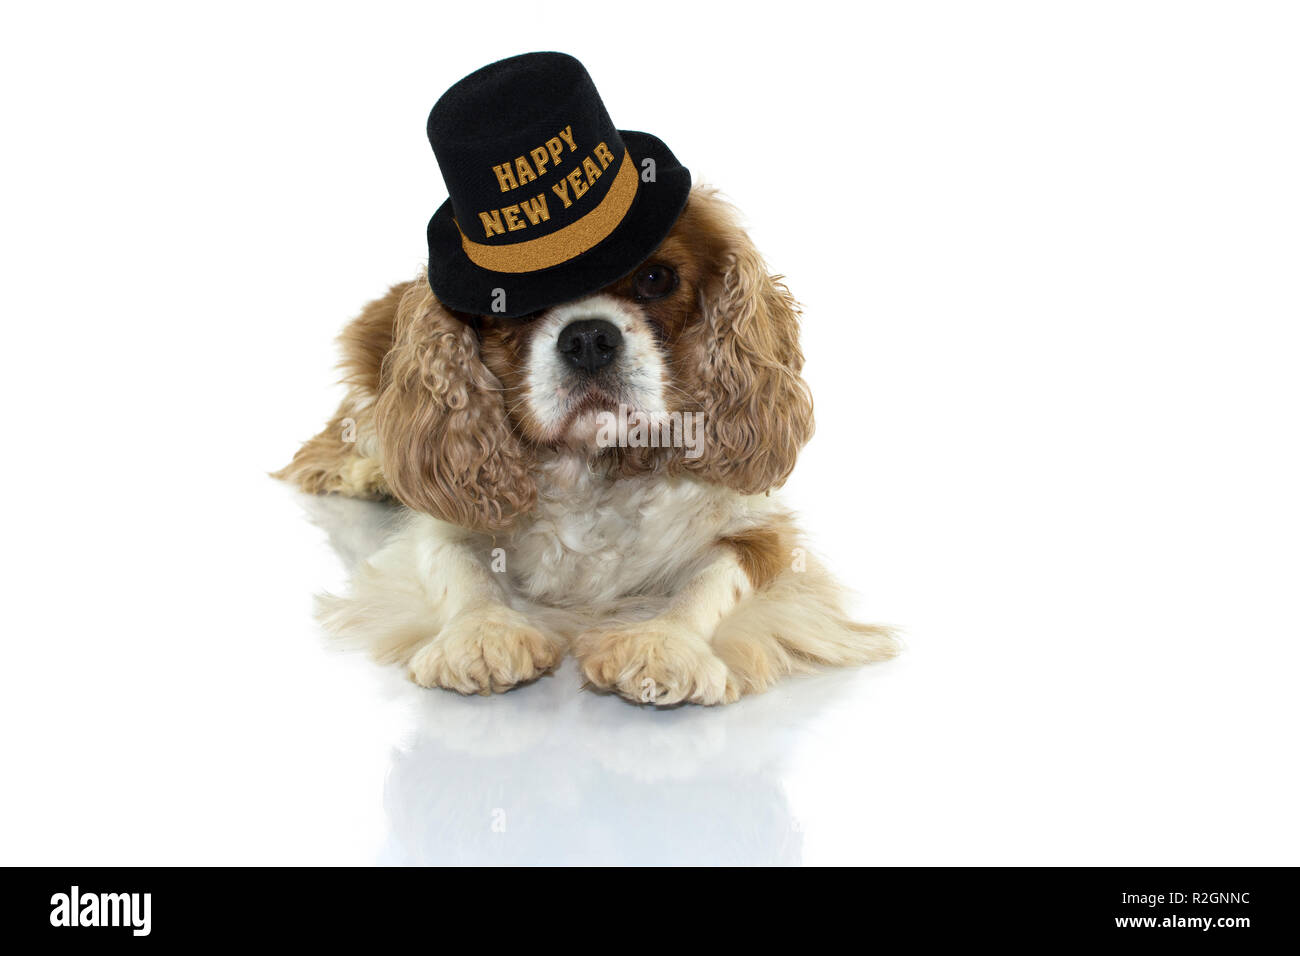 CAVALIER CHARLES DOG CELEBRATING NEW YEAR WITH A PARTY BLACK AND GOLD HAT  WITH TEXT. LYING DOWN, LOOKING AT CAMERA GAINST WHITE BACKGROUND. Stock Photo